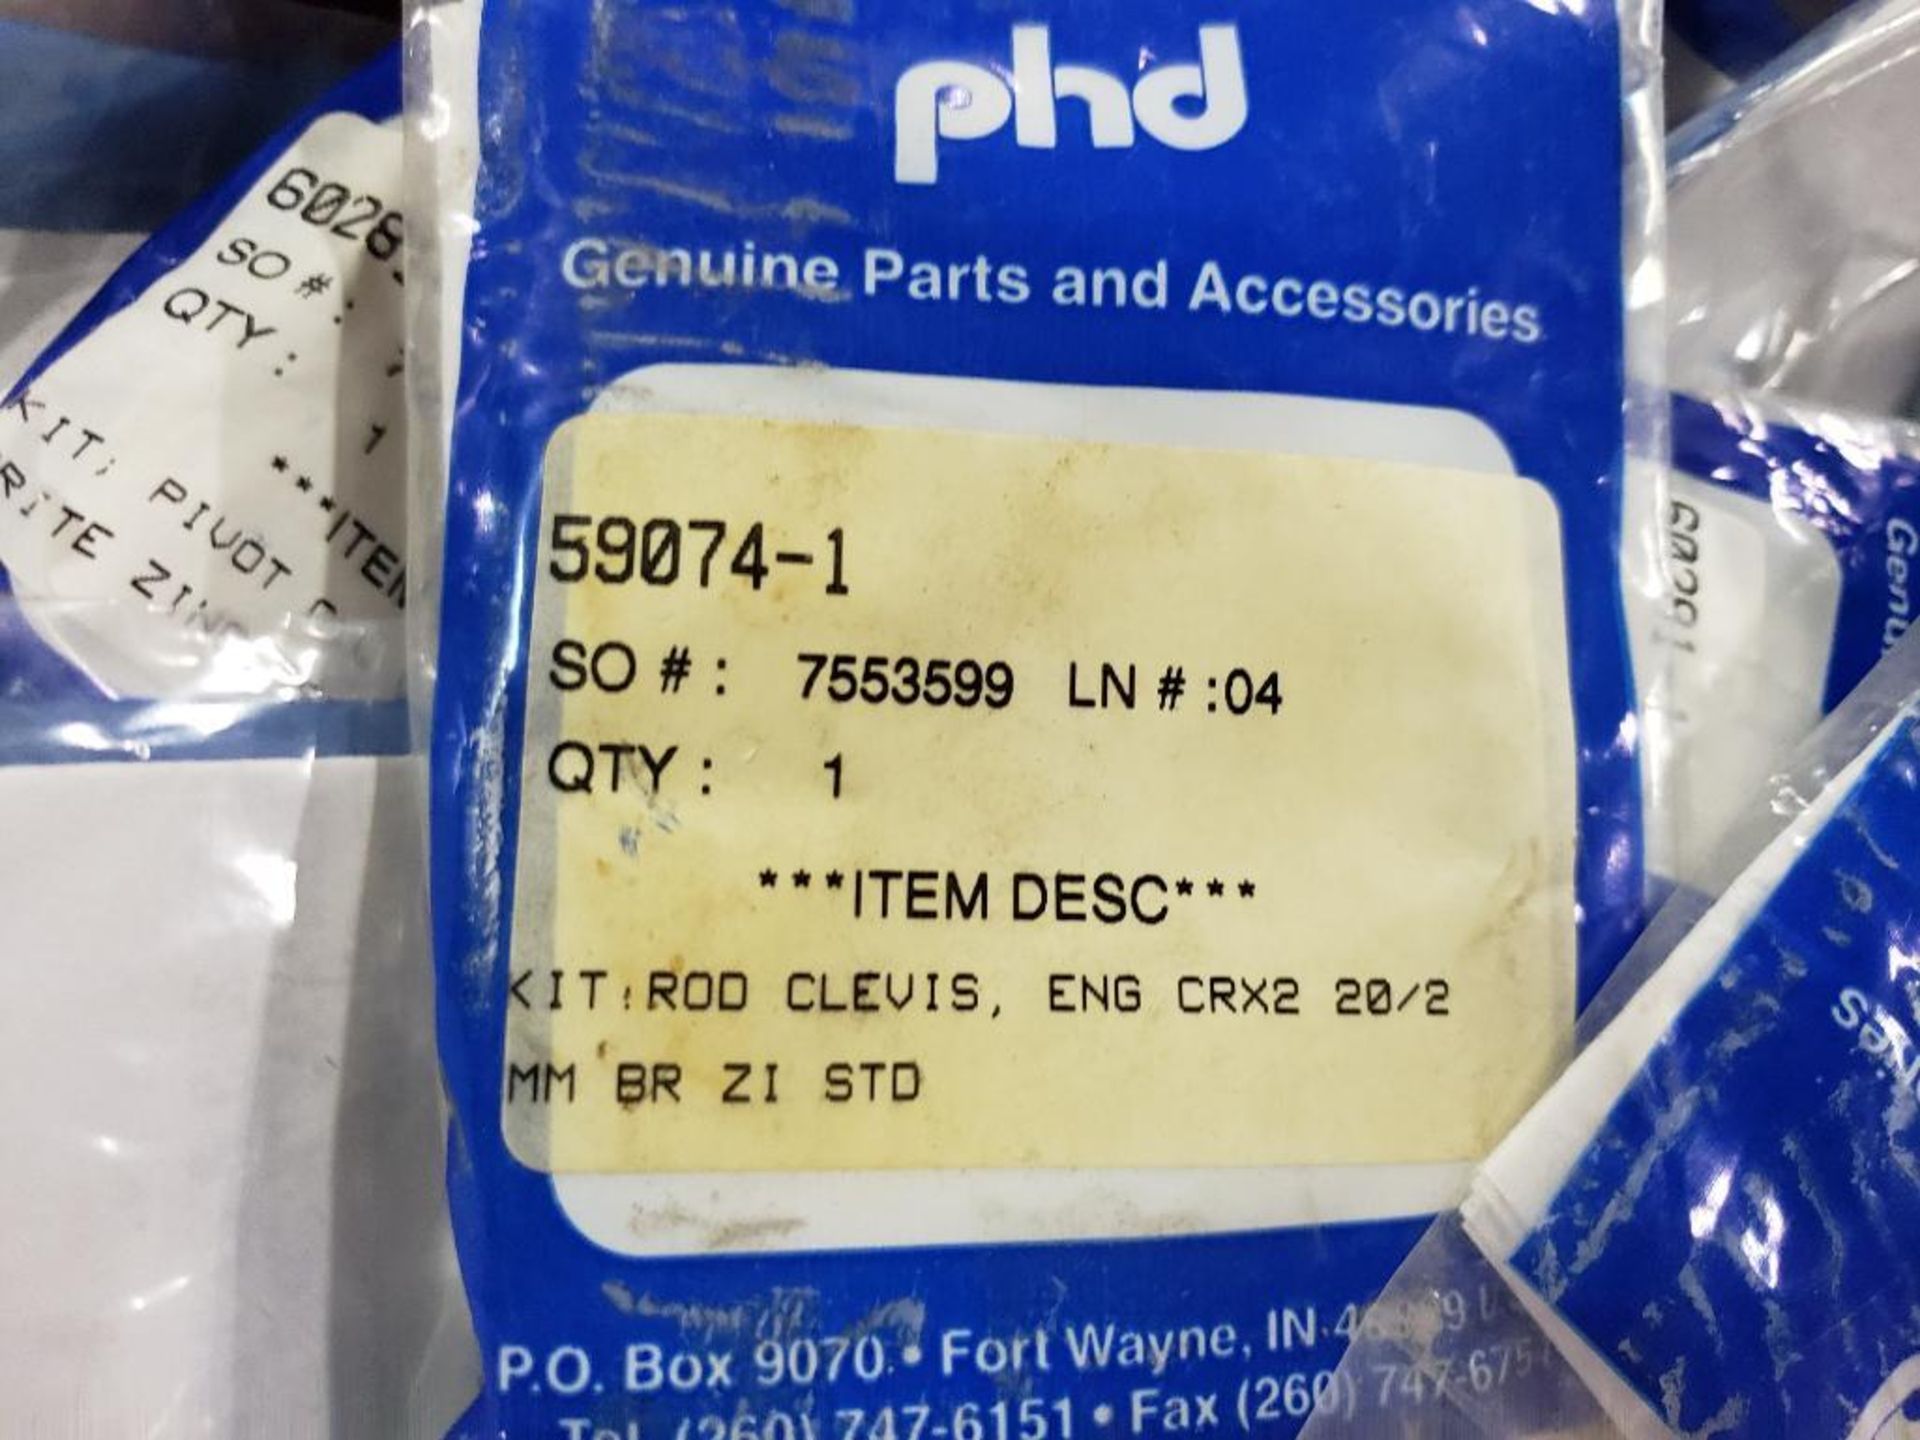 Assorted PHD replacement parts. New in package. - Image 4 of 6